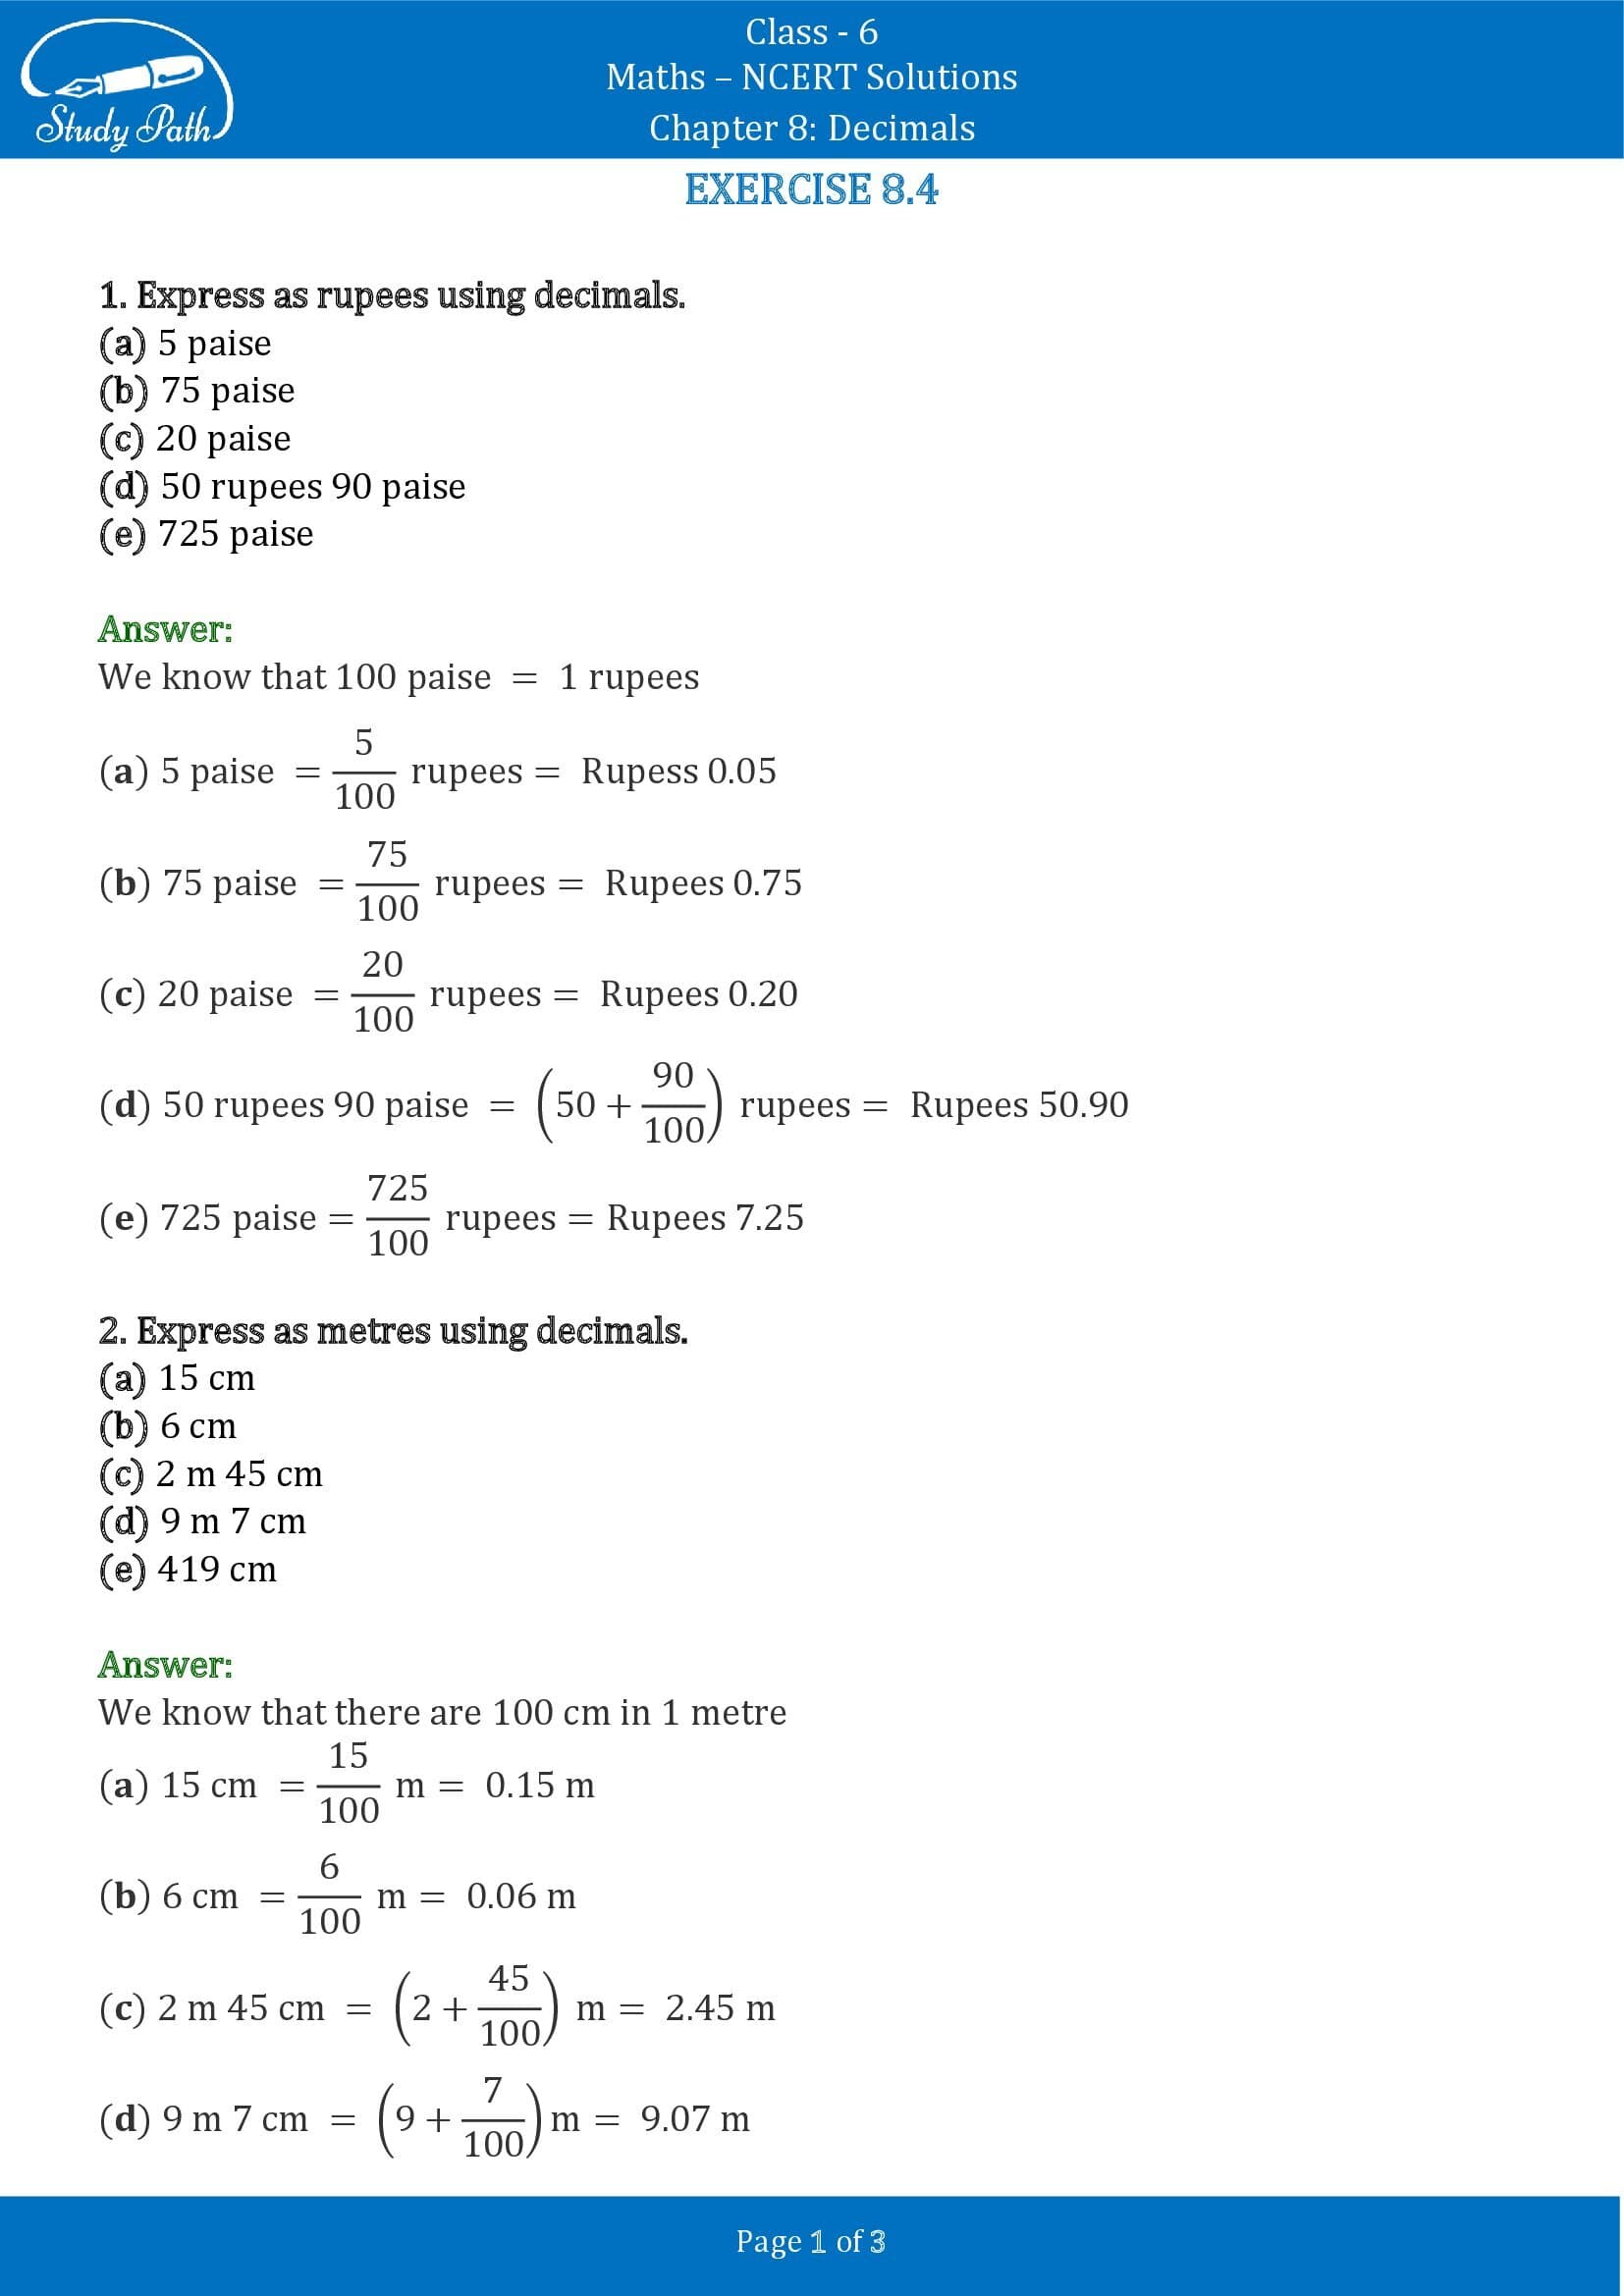 NCERT Solutions for Class 6 Maths Chapter 8 Decimals Exercise 8.4 00001